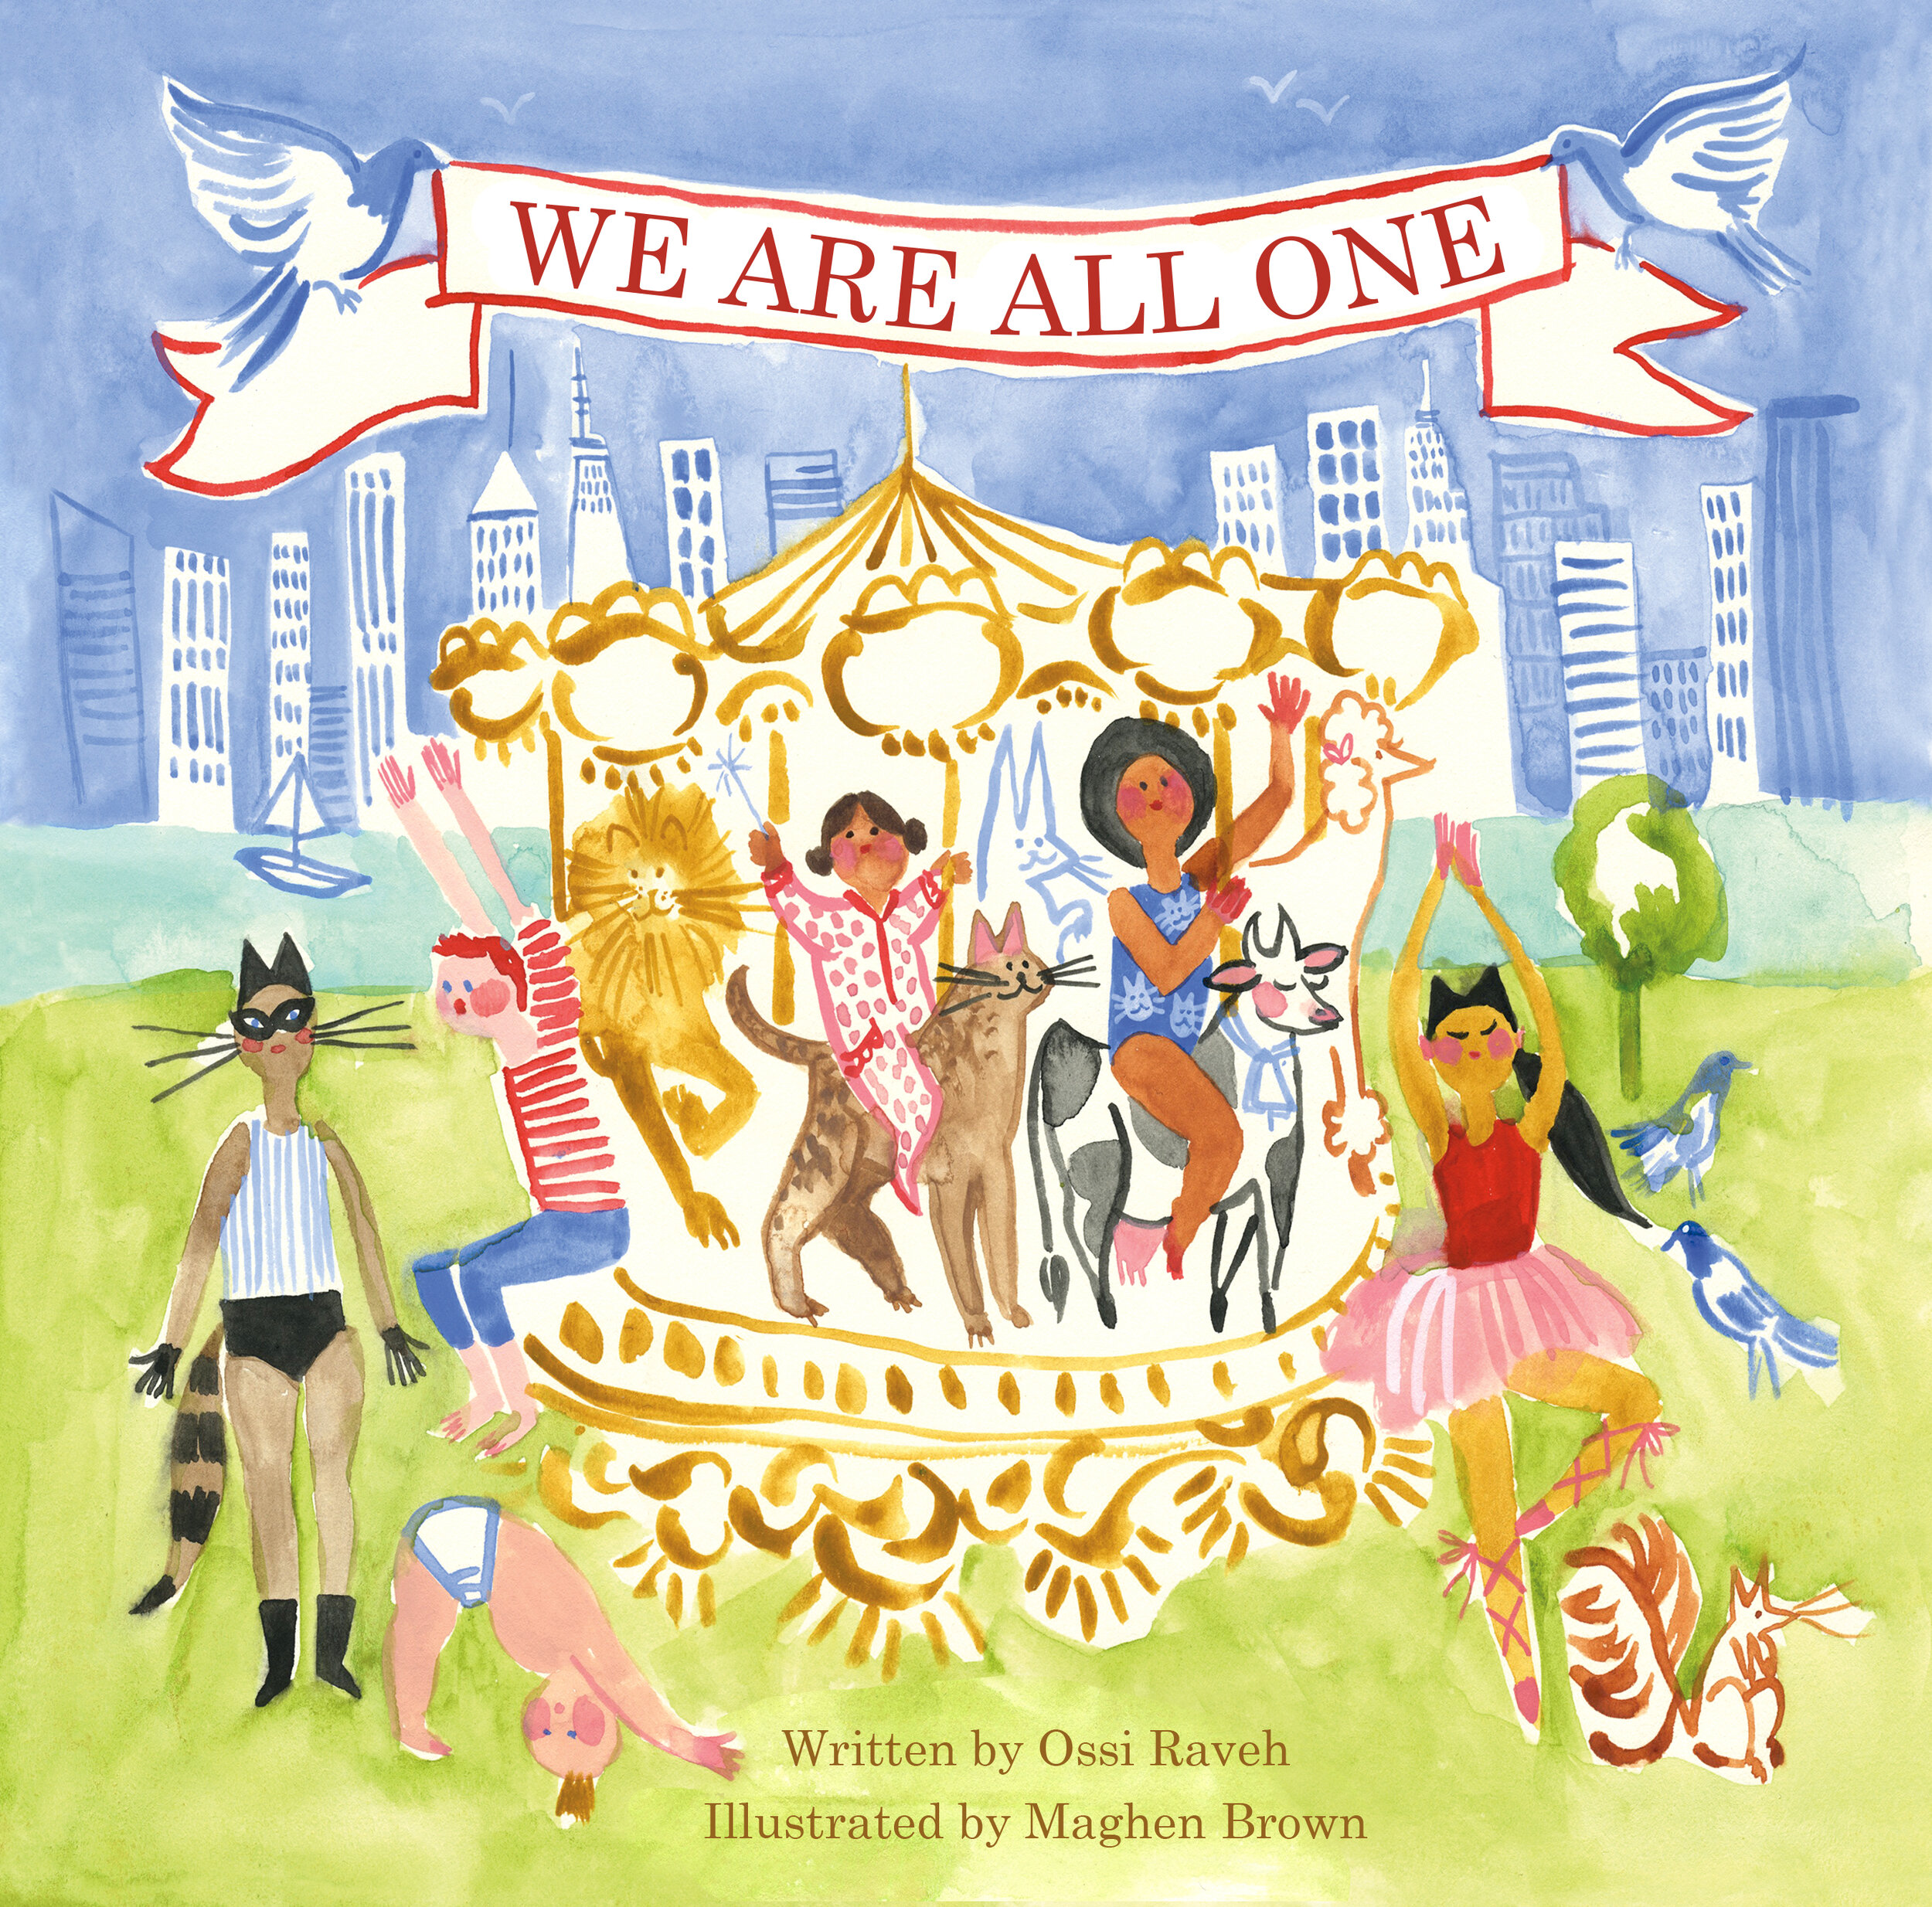 THE COVER OF THE CHILDREN'S BOOK WE ARE ALL ONE